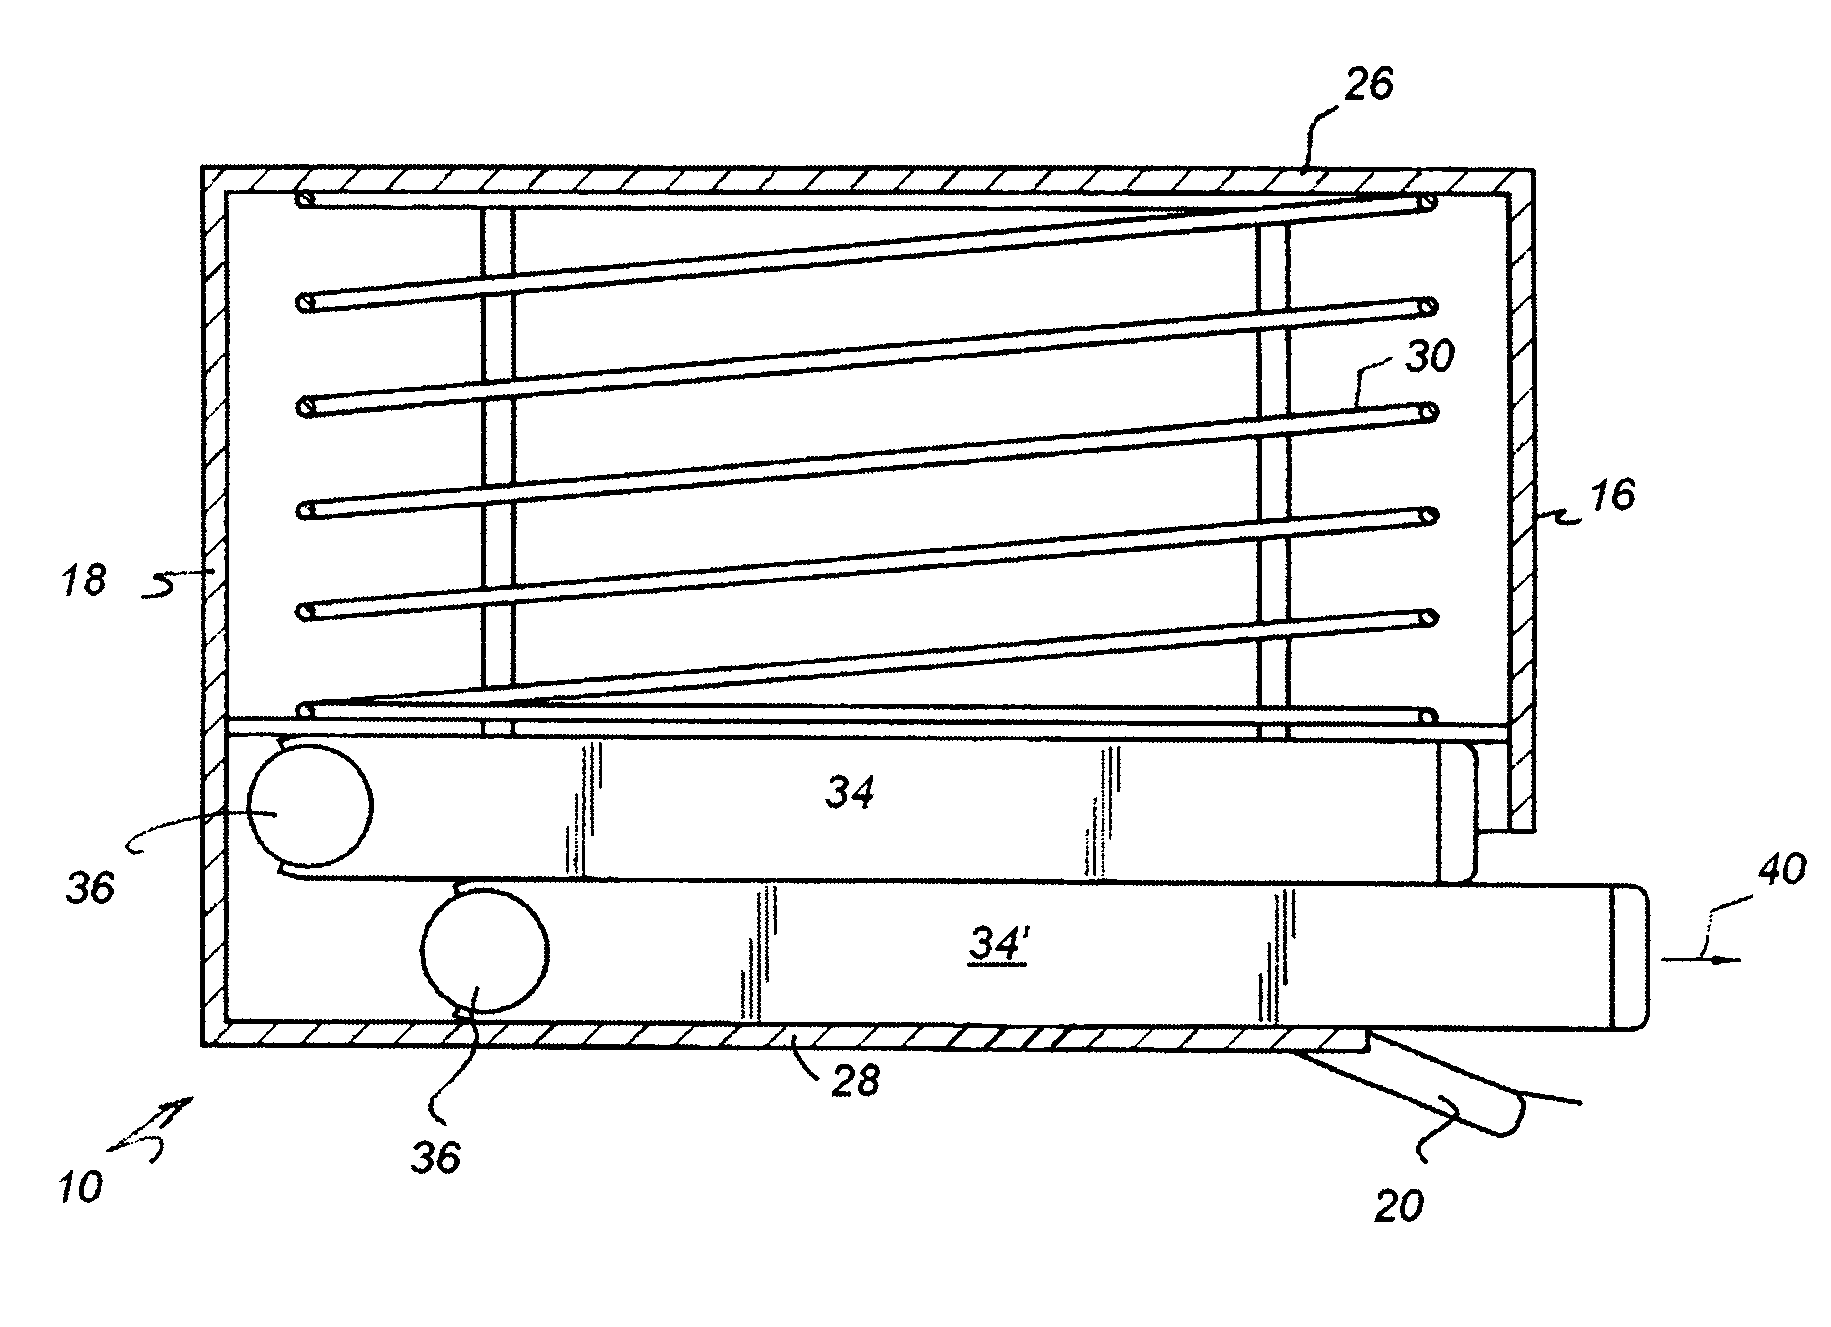 Device and method for retaining and dispensing ammunition clips